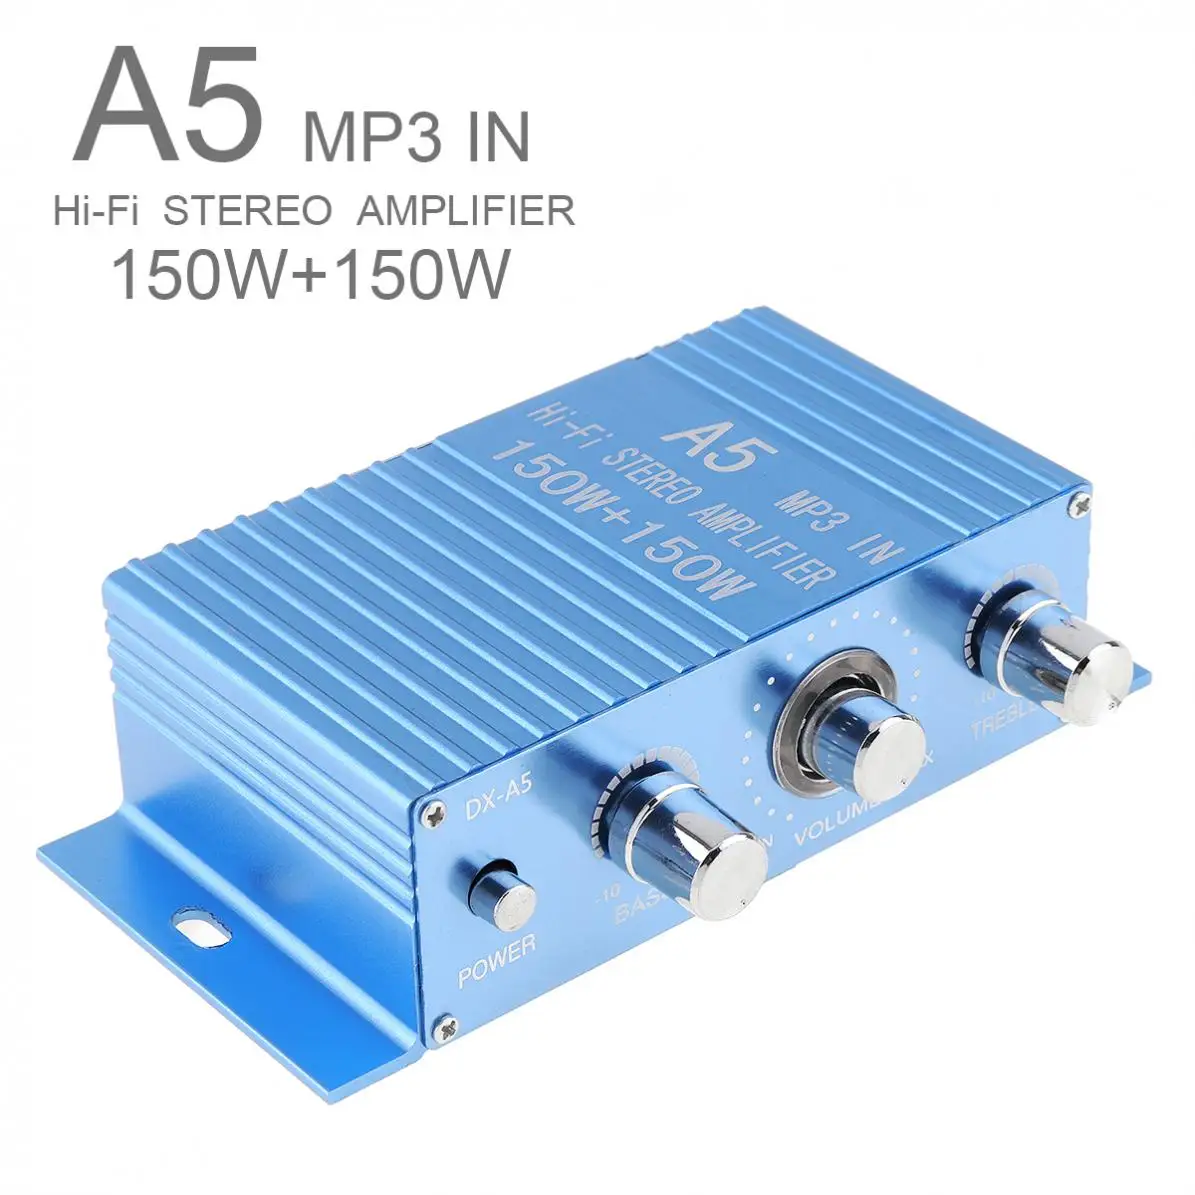 A15 DC12V 2.0 Two Channel MP3 in Hi-Fi Stereo Amplifier 150W + 150W with 3.5AUX Interface for Car / MP3 / PC / CD / Speakers ipc1800sn 4 inch utc 8mp tvi 8mp ahd 1080p cvi cctv tester monitor ahd cvi tvi with poe dc12v output